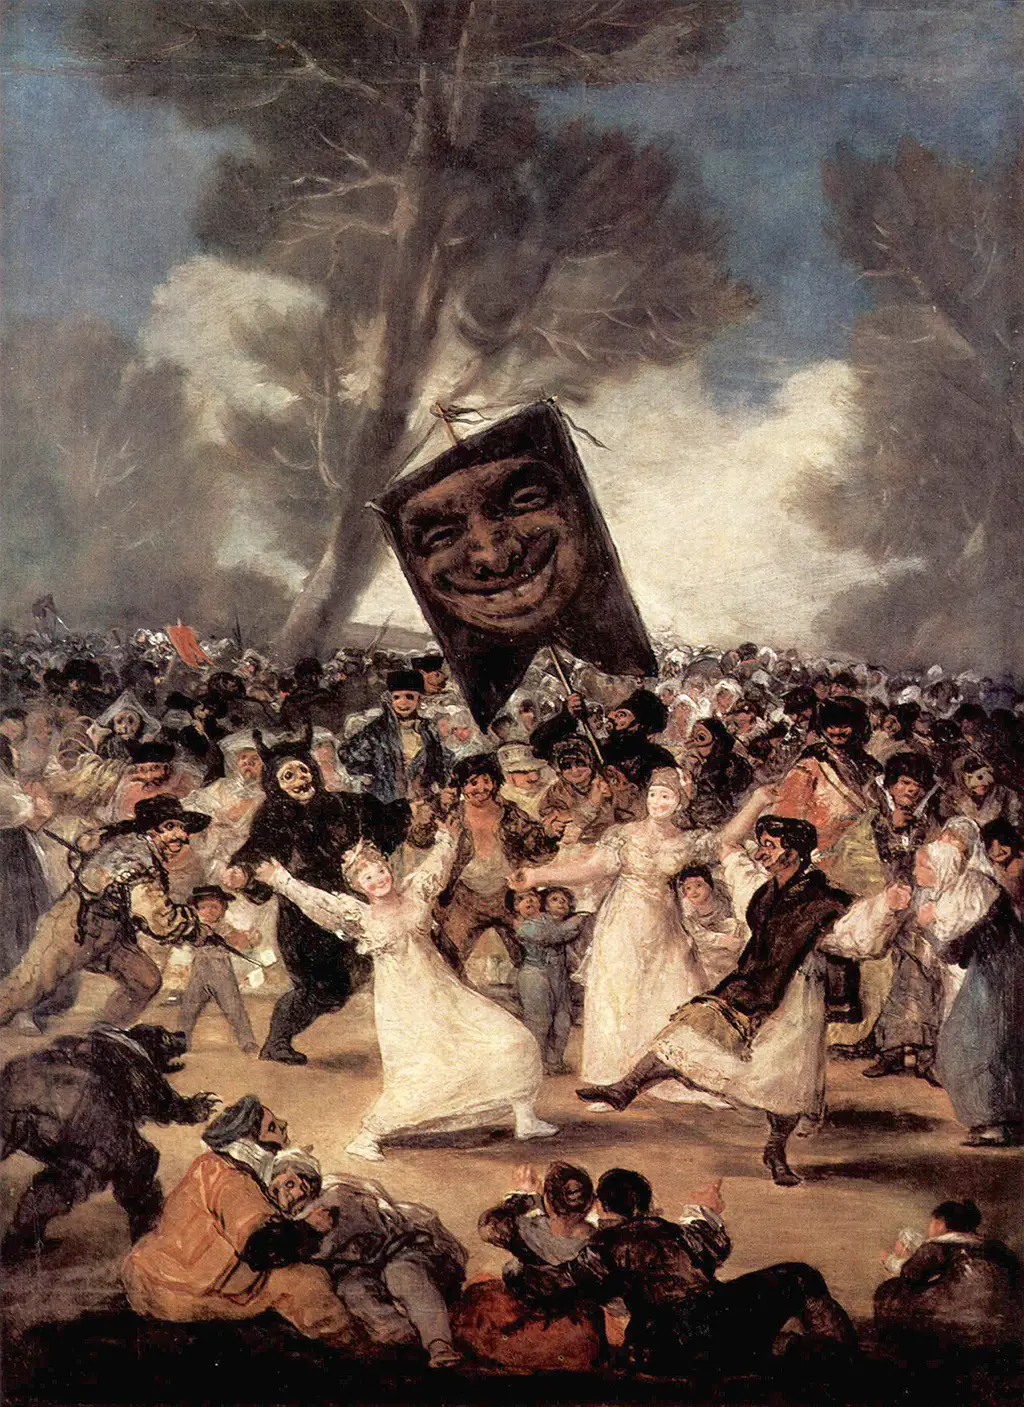 The Burial of the Sardine in Detail Francisco de Goya